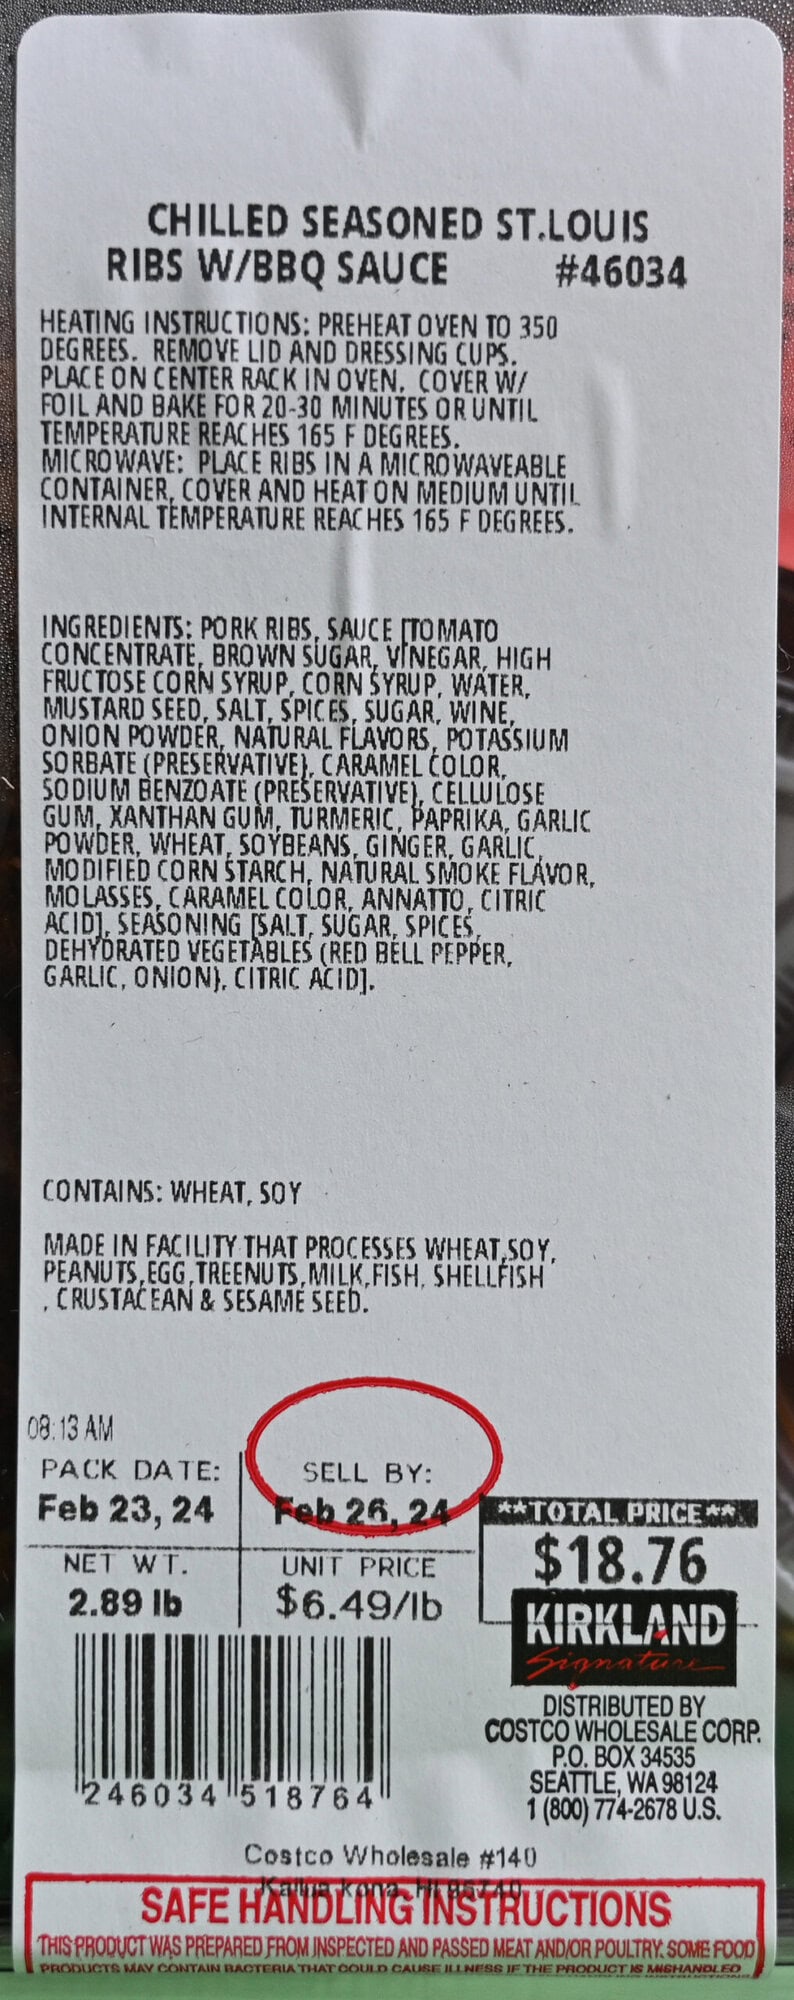 Closeup image of the front label on the ribs showing the price, ingredients and cooking instructions.